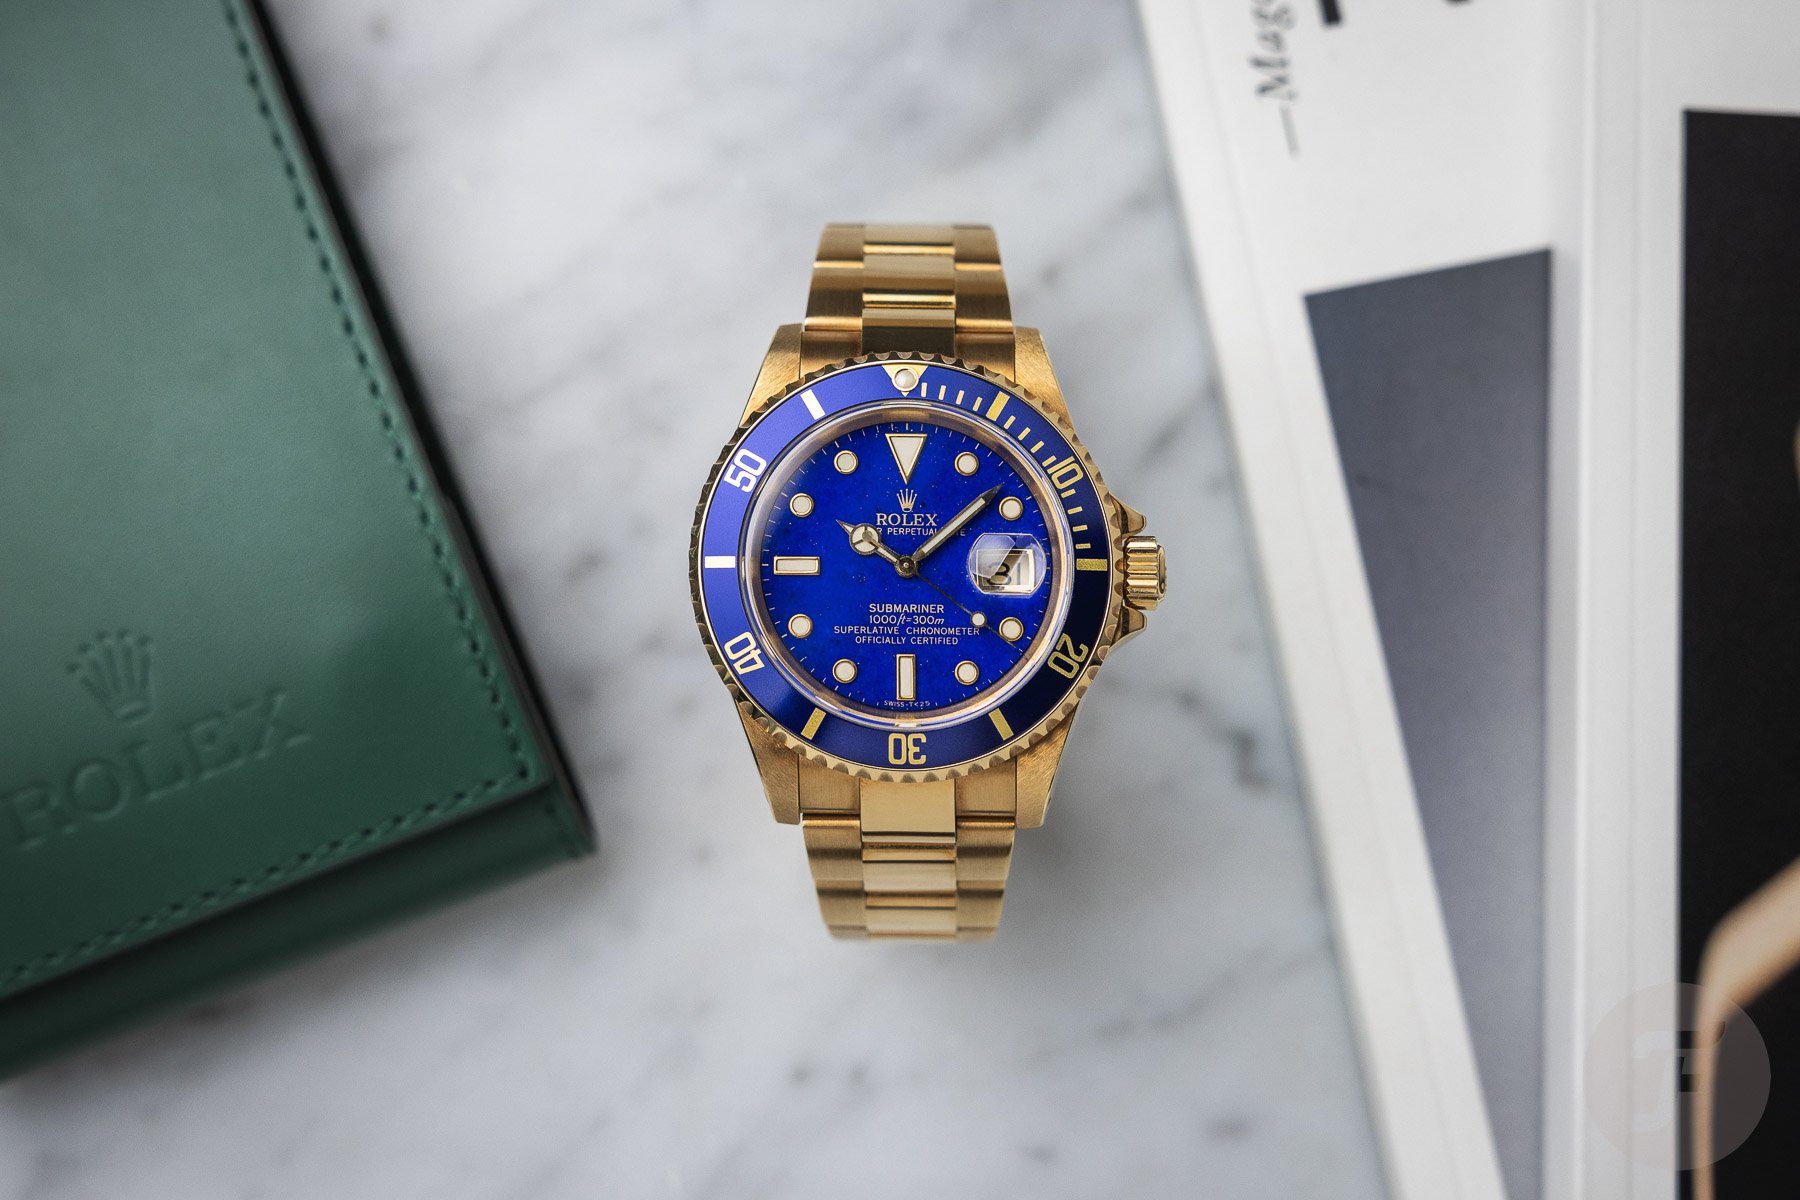 pre-owned full-gold Rolex Submariner ref. 16618